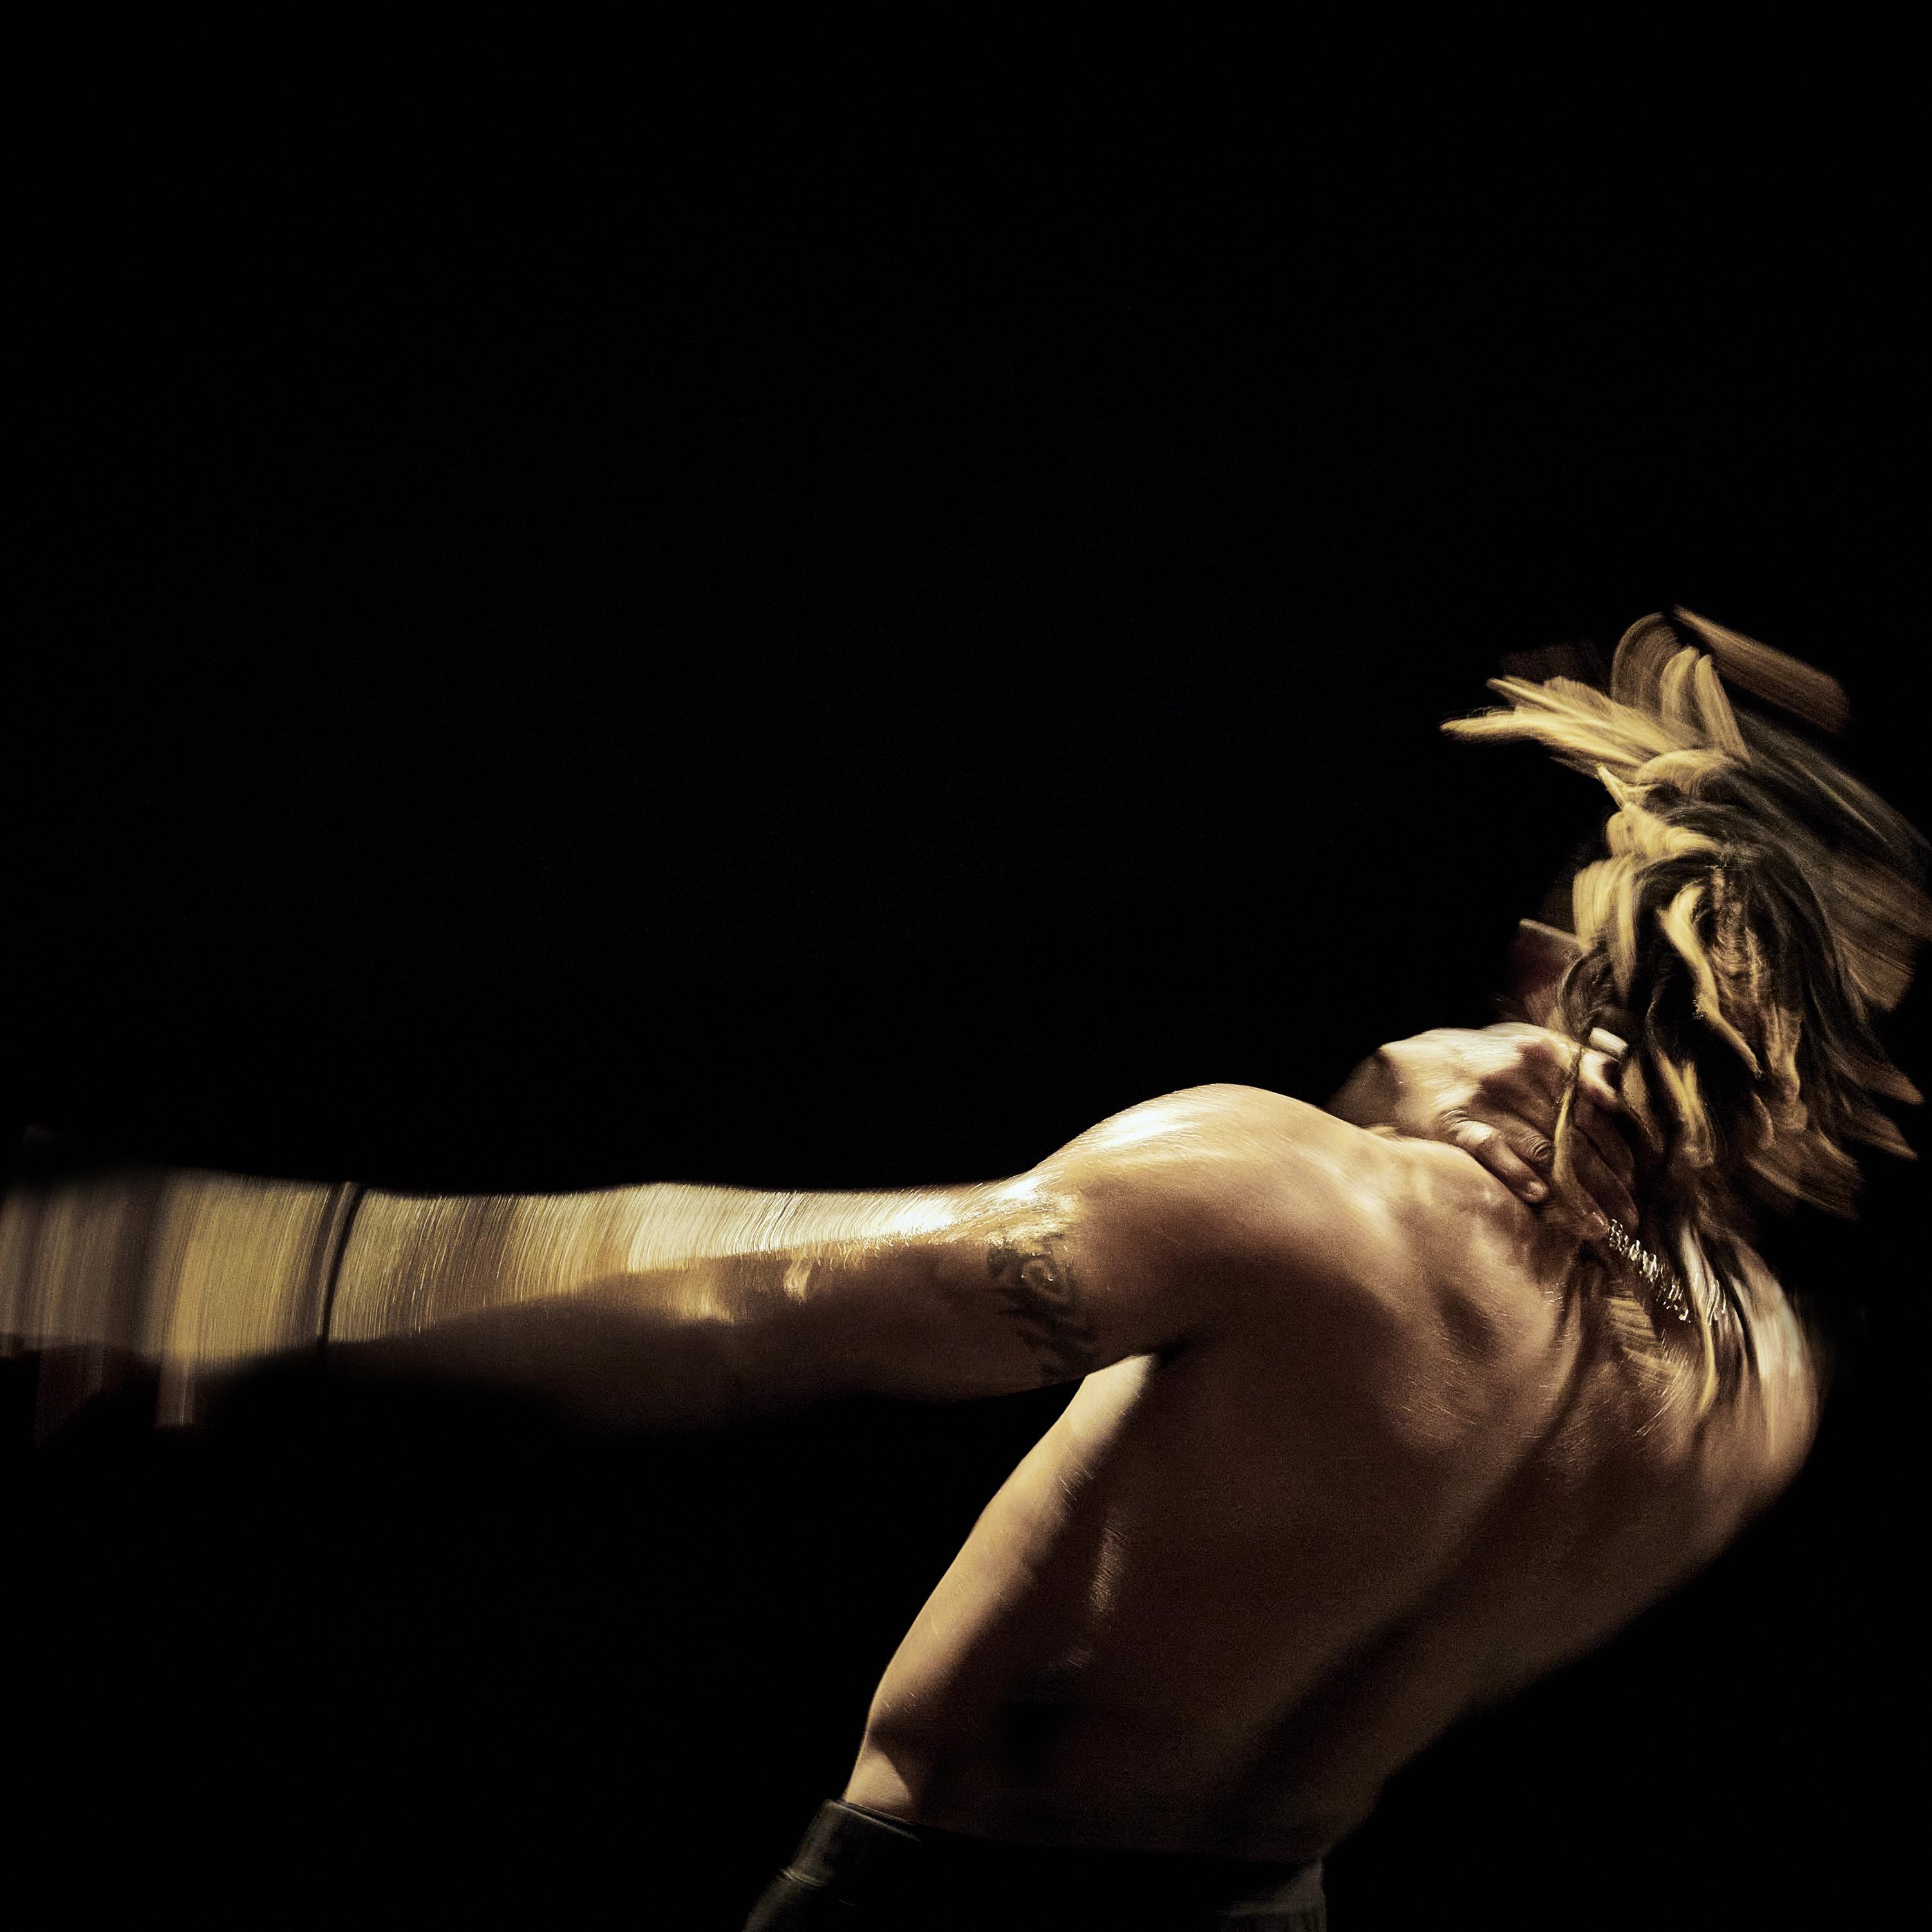 Michel « Meech » Onomo from the back, shirtless and moving in a black background